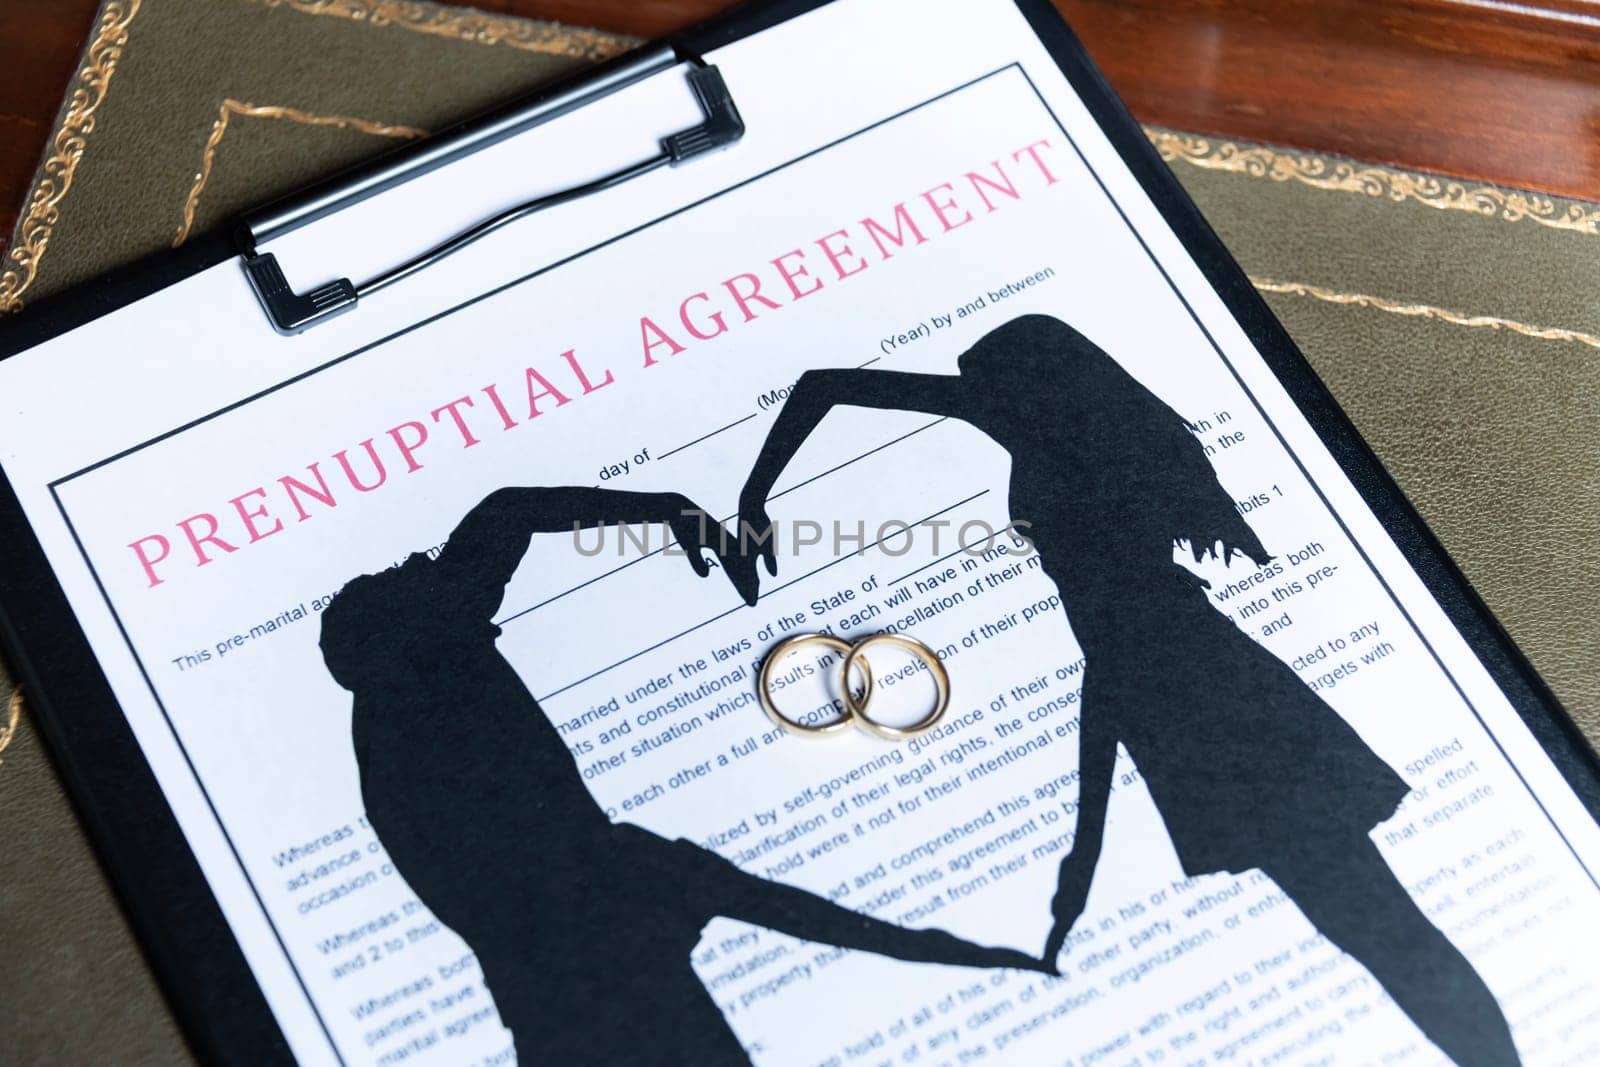 A prenuptial agreement with a silhouette of a couple and wedding rings, symbolizing marital contracts and legal preparation. by jbruiz78